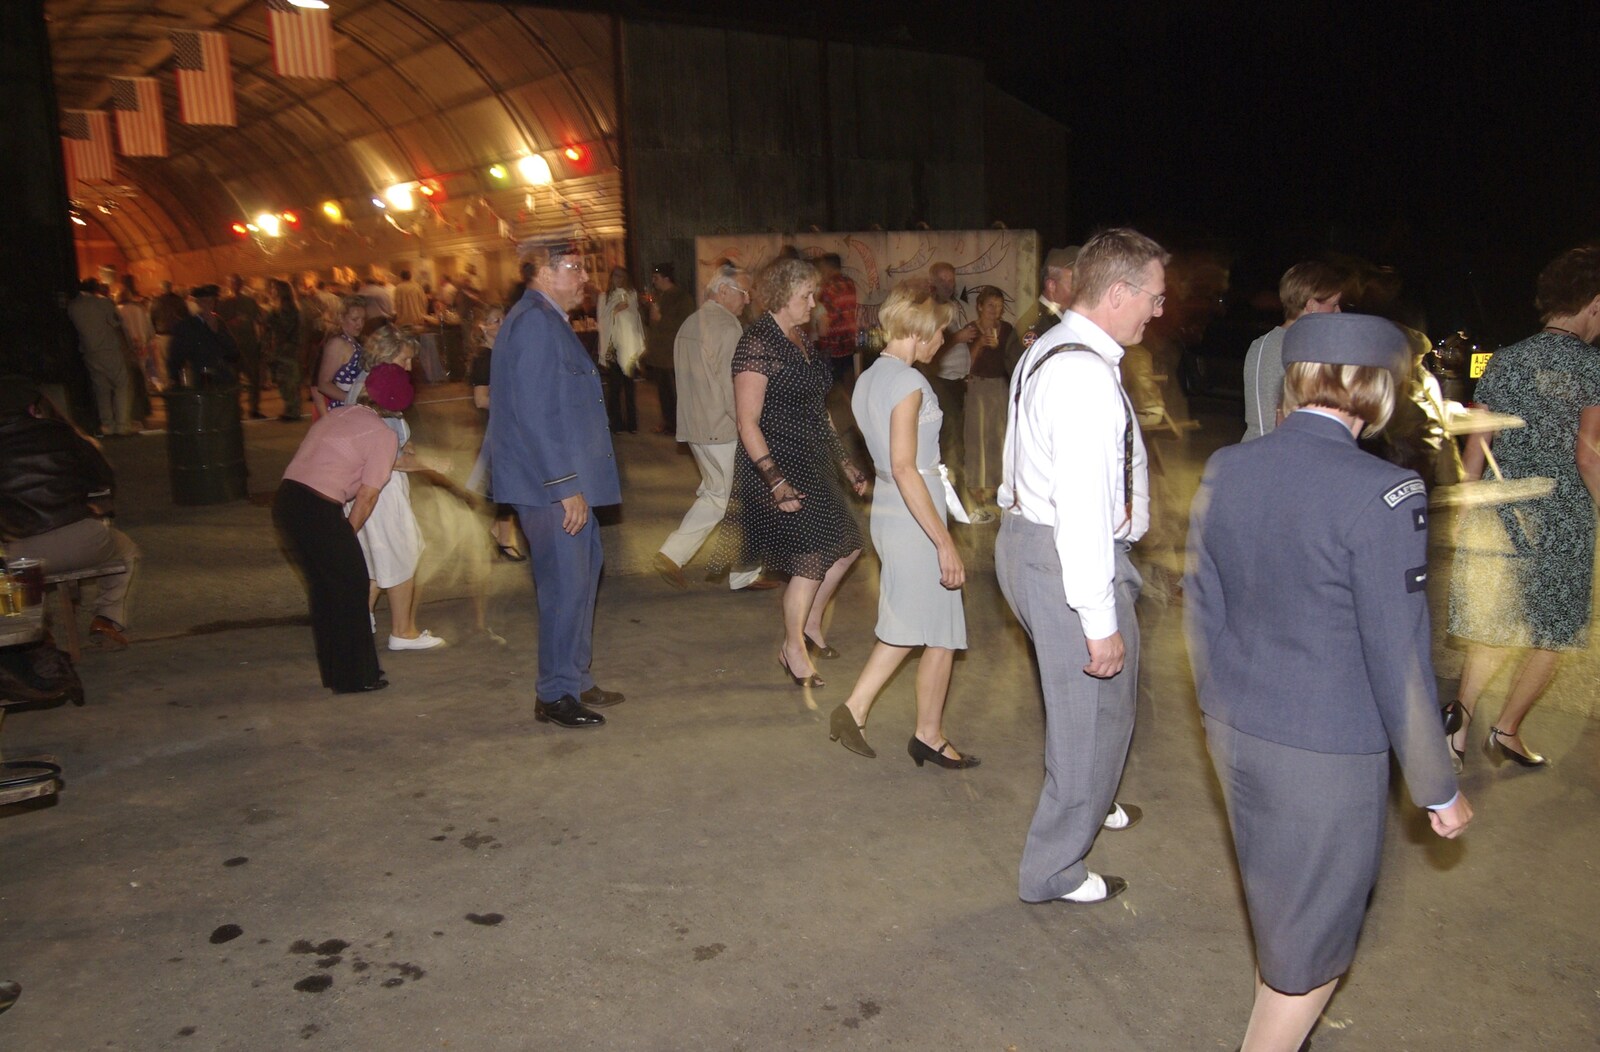 A 1940s Airfield Hangar Dance, Debach, Suffolk - 9th June 2007: Some sort of line dancing occurs outside